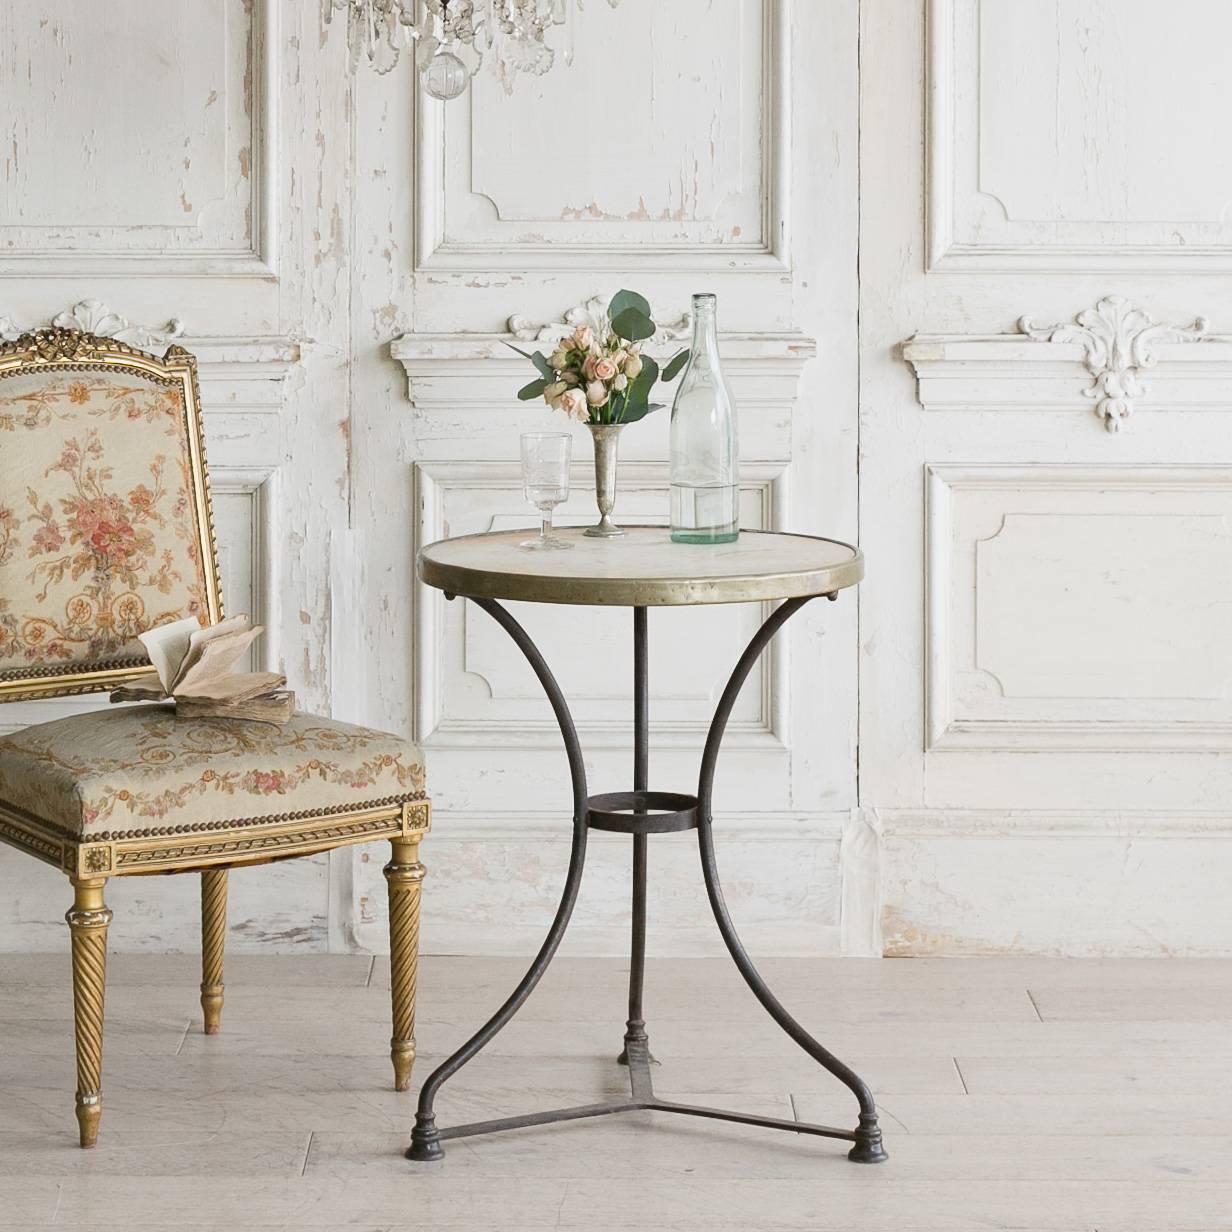 Antique Parisian cafe table with marble table top and iron base. Brass colored metal surrounds the marble and connects to the iron base. A simple tripod stretcher holds the legs together. This piece is perfect for a small balcony, as a riser for a